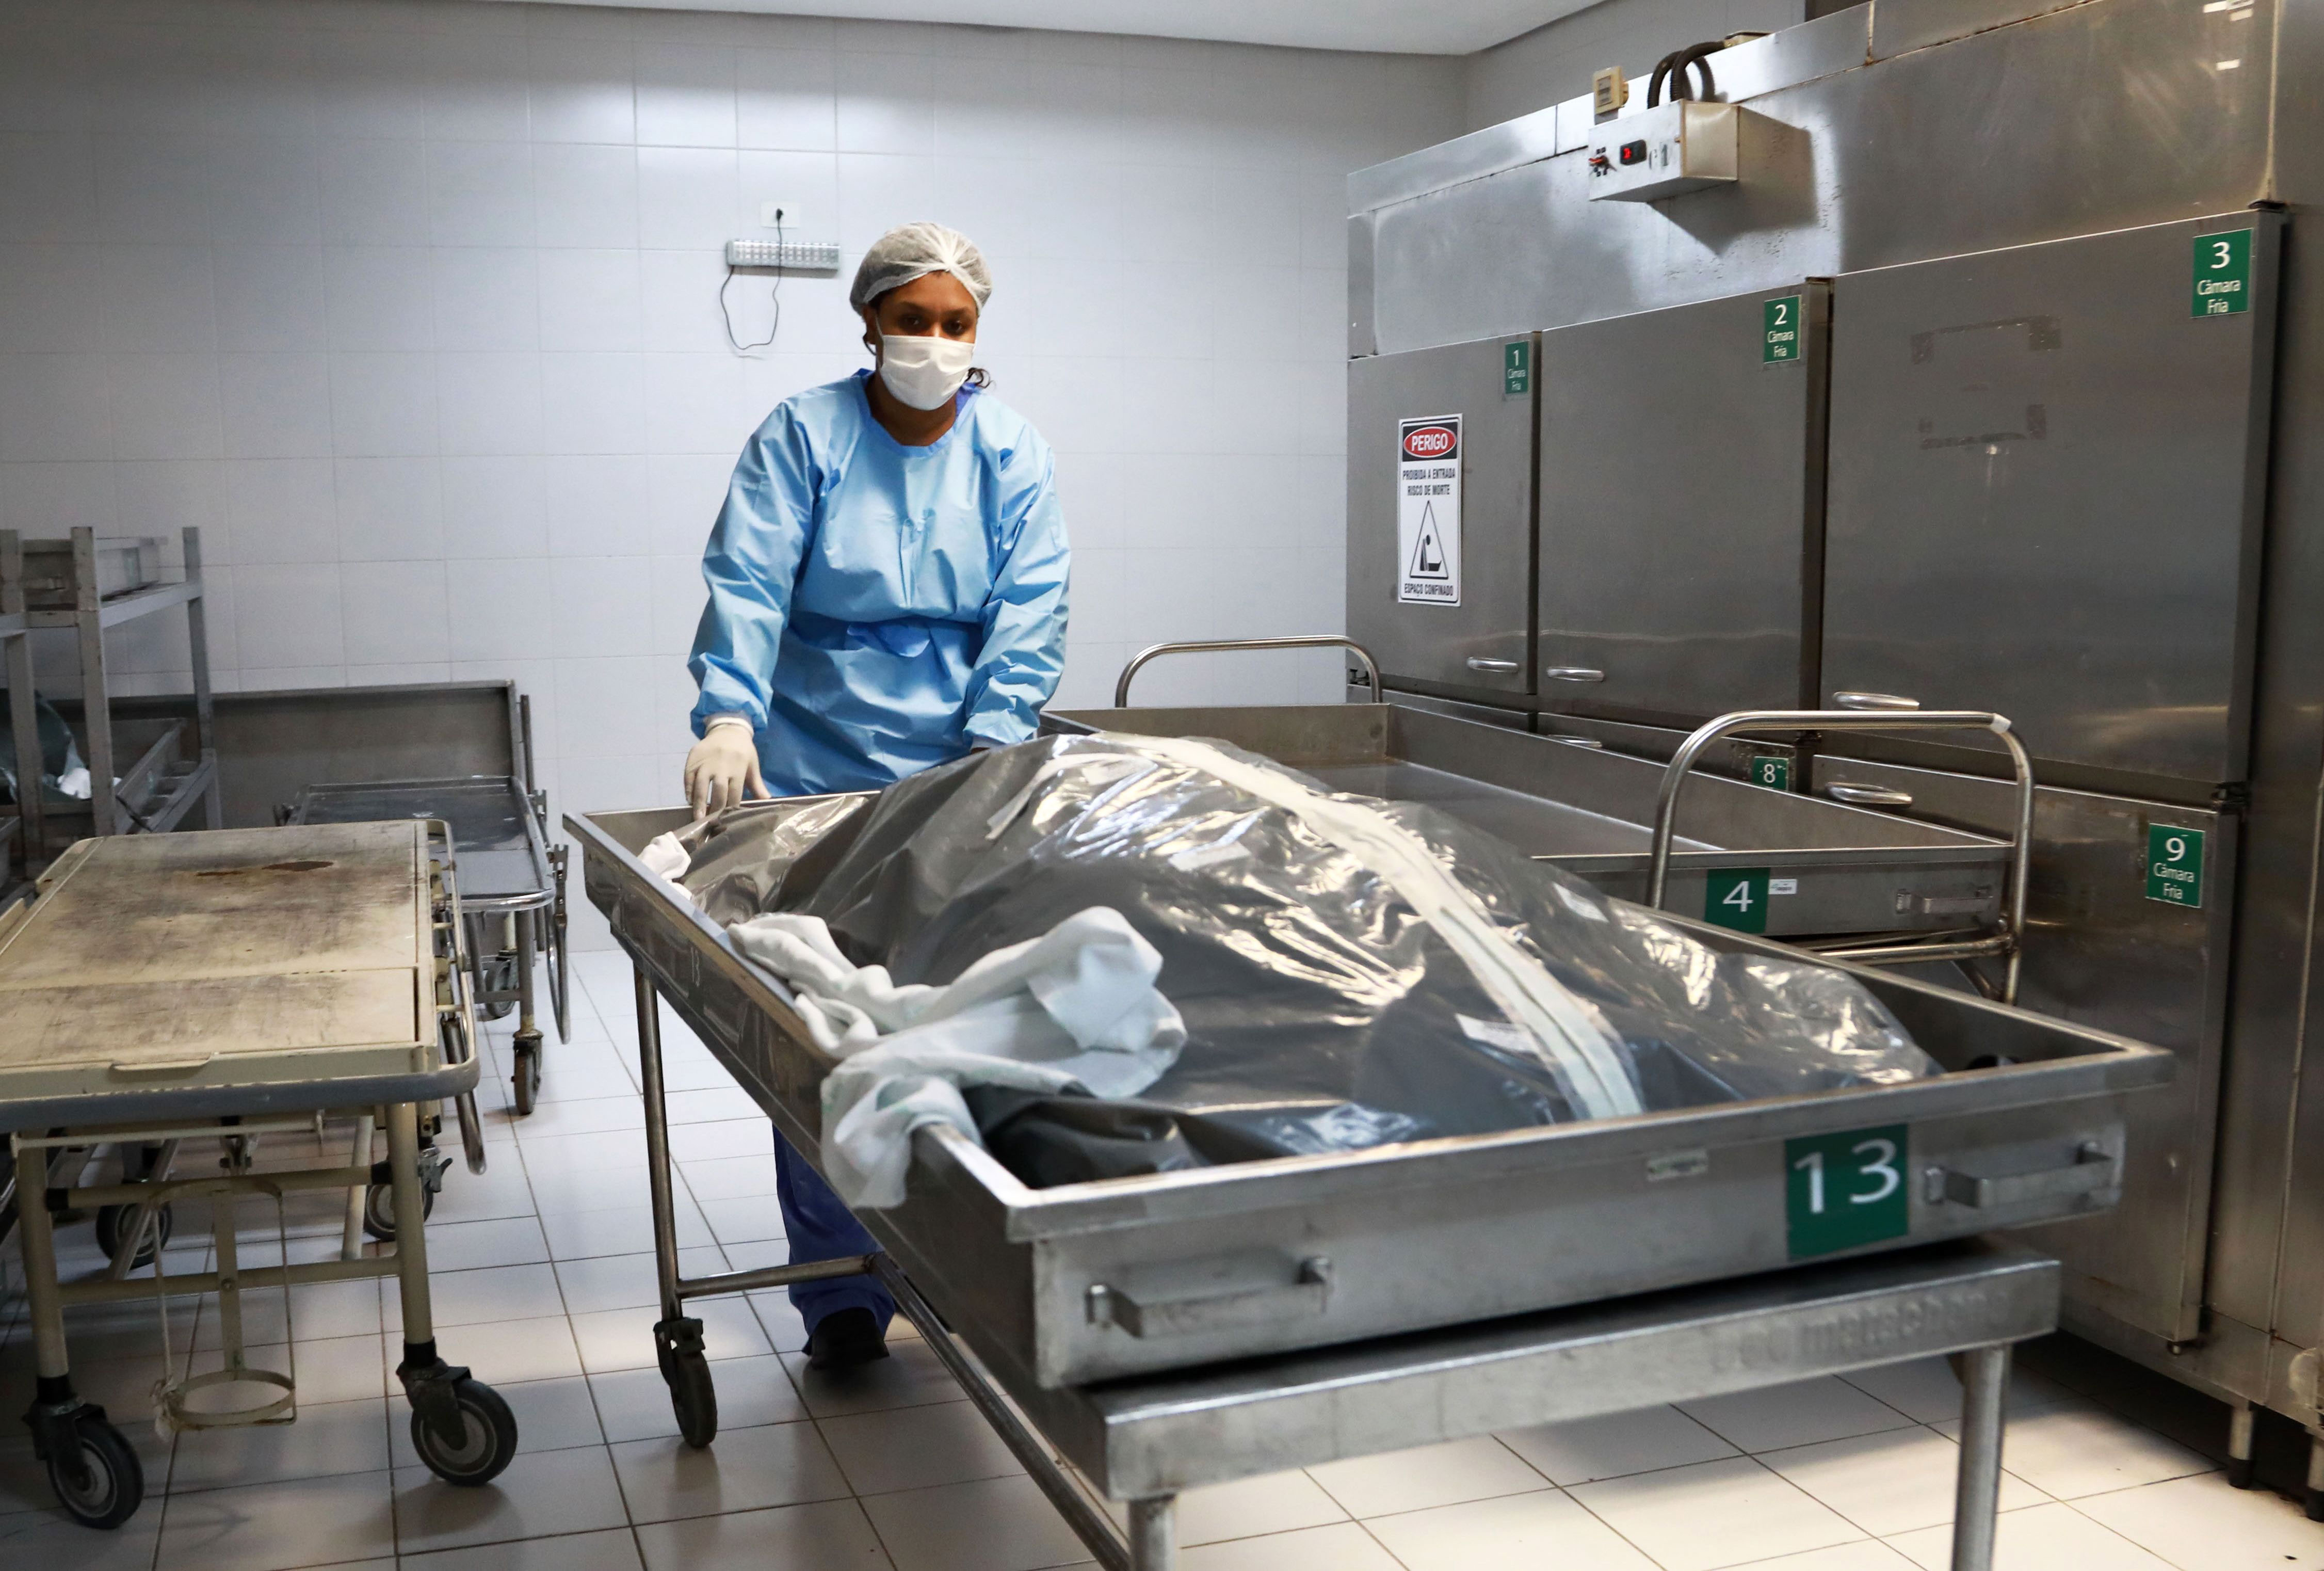 A morgue employee works with the body of a Covid-19 victim at a hospital in Porto Alegre, Brazil, on March 4.